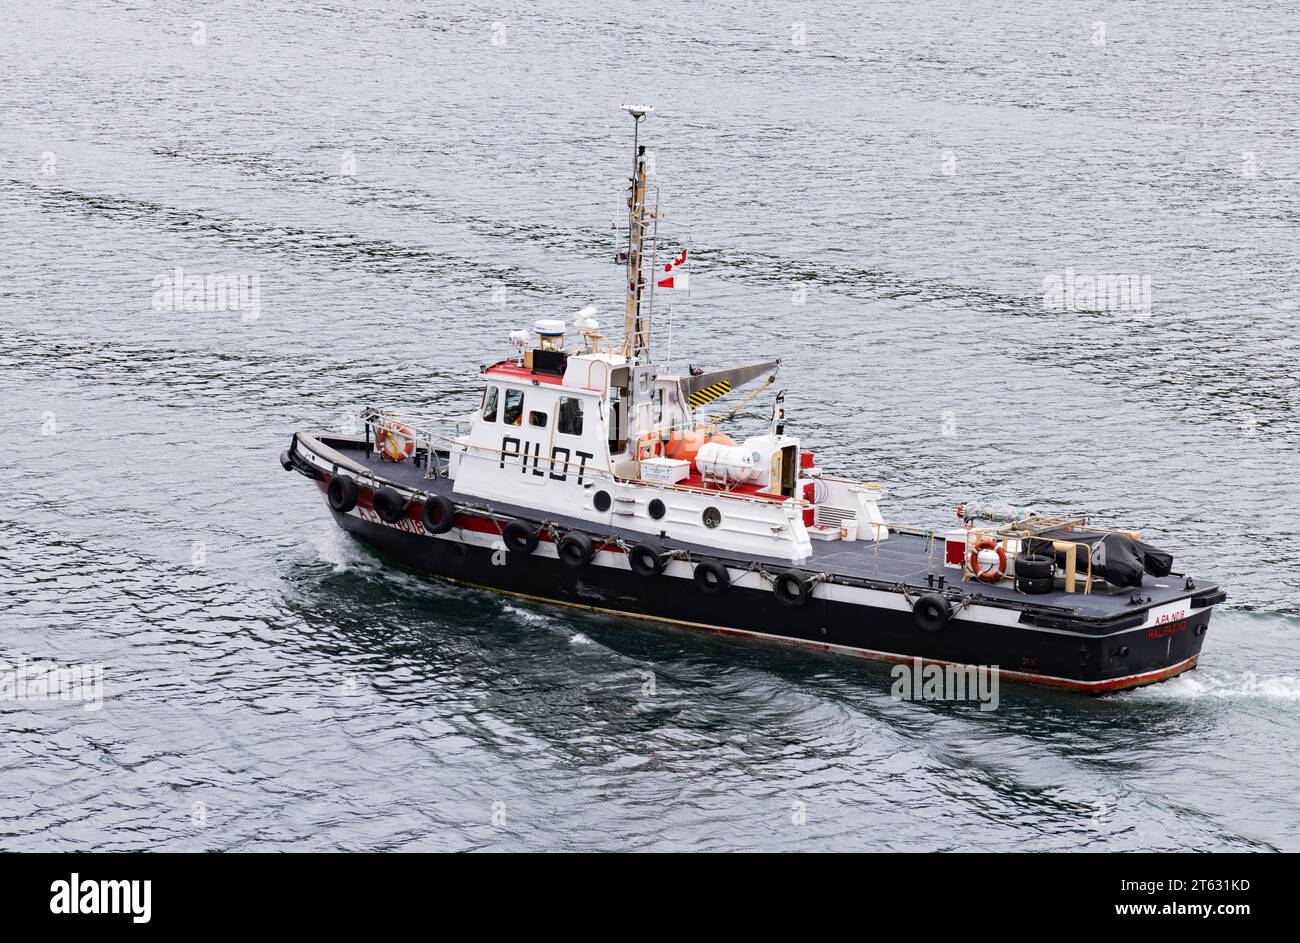 A pilot boat, or pilot ship, used in harbour to transport maritime pilots between land and incoming or outgoing ships; St. Johns, Newfoundland Canada. Stock Photo